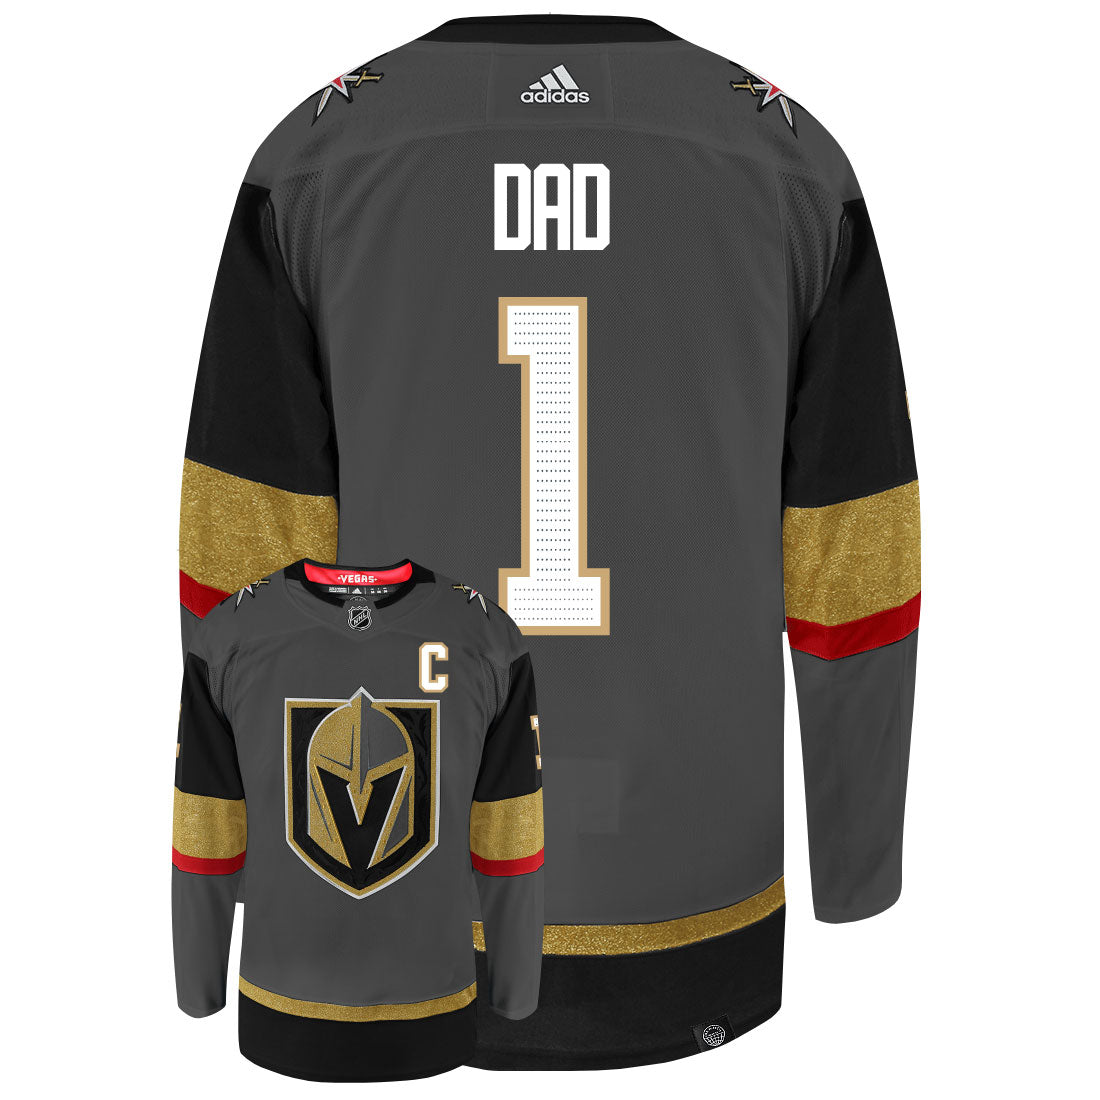 Vegas Golden Knights Dad Number One Adidas Primegreen Authentic NHL Hockey Jersey